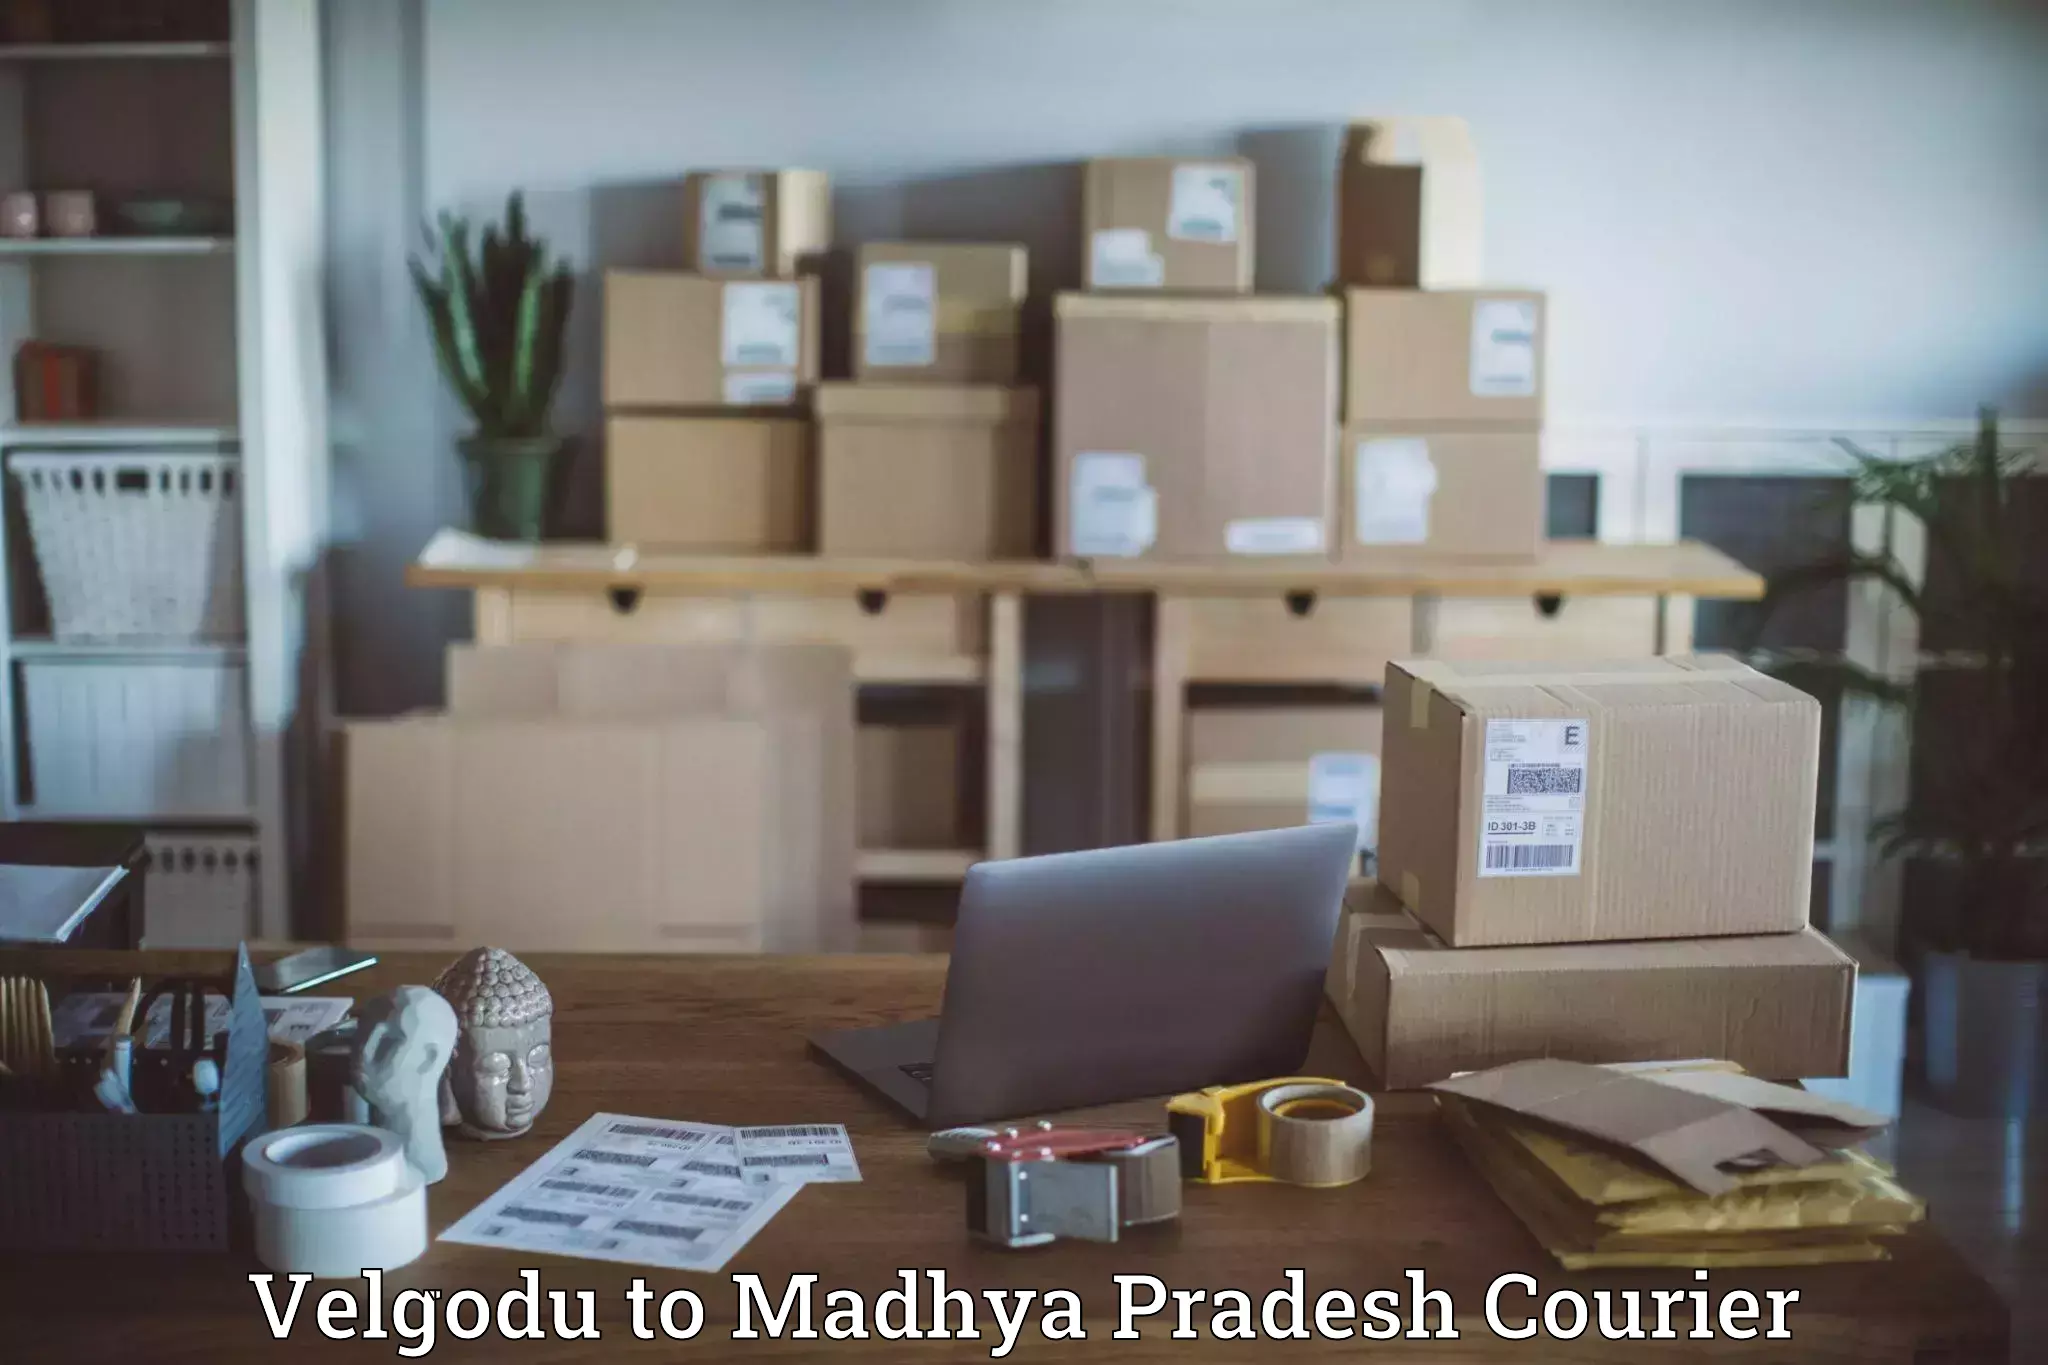 Cost-effective courier options Velgodu to Gwalior